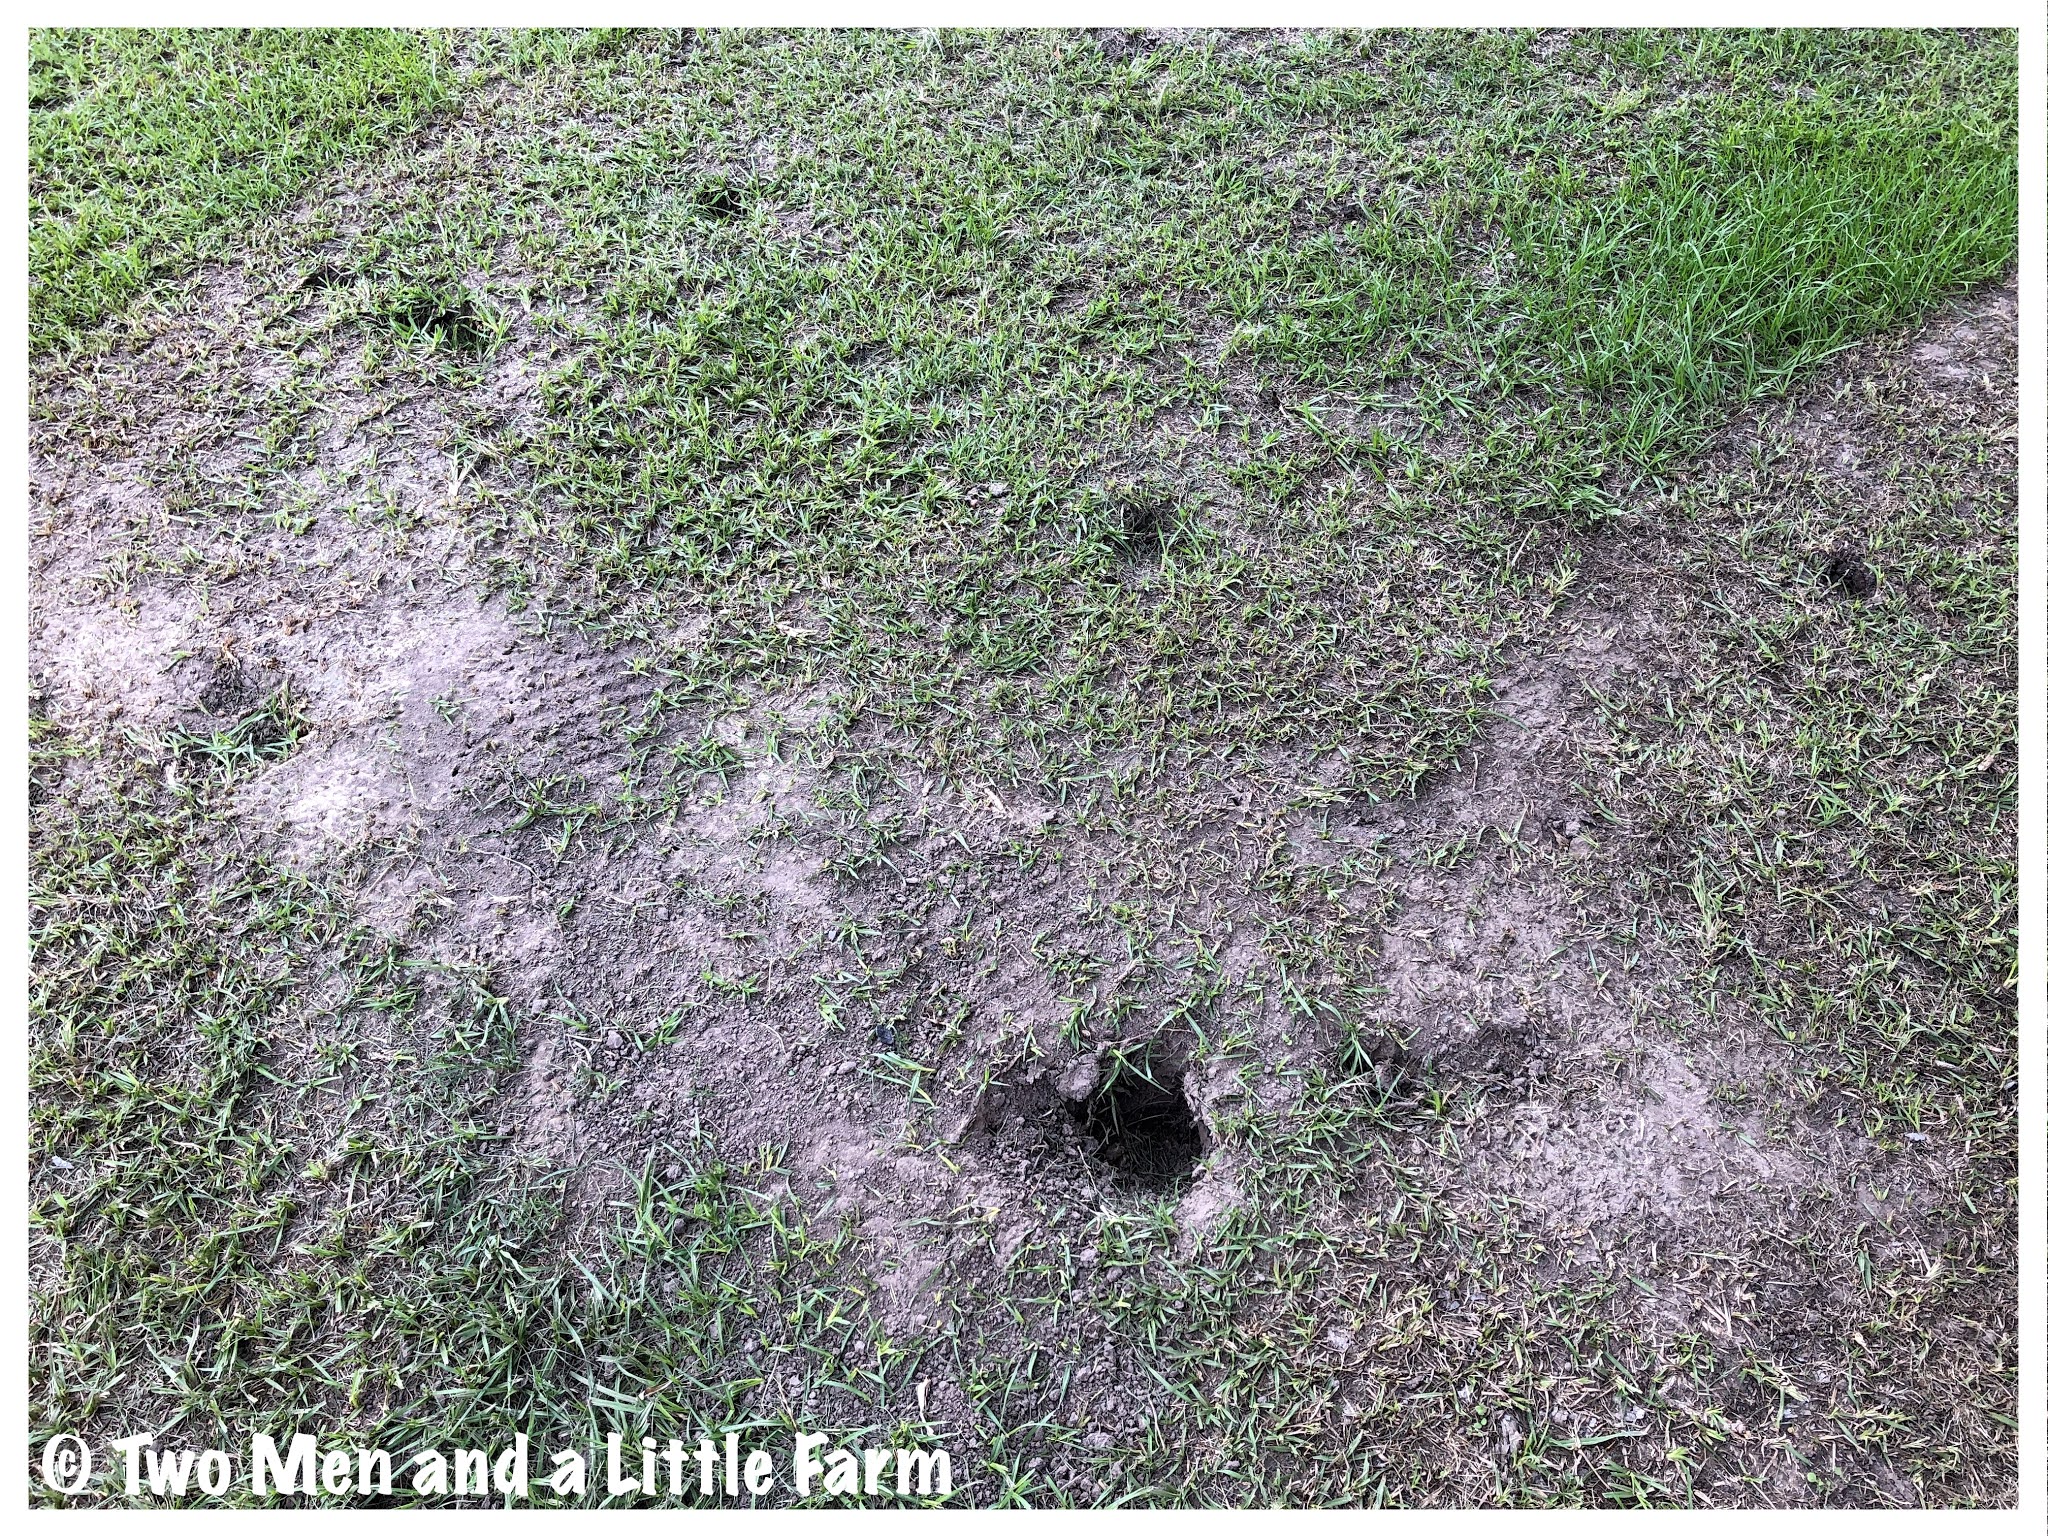 Two Men and a Little Farm: MYSTERY HOLES IN YARD